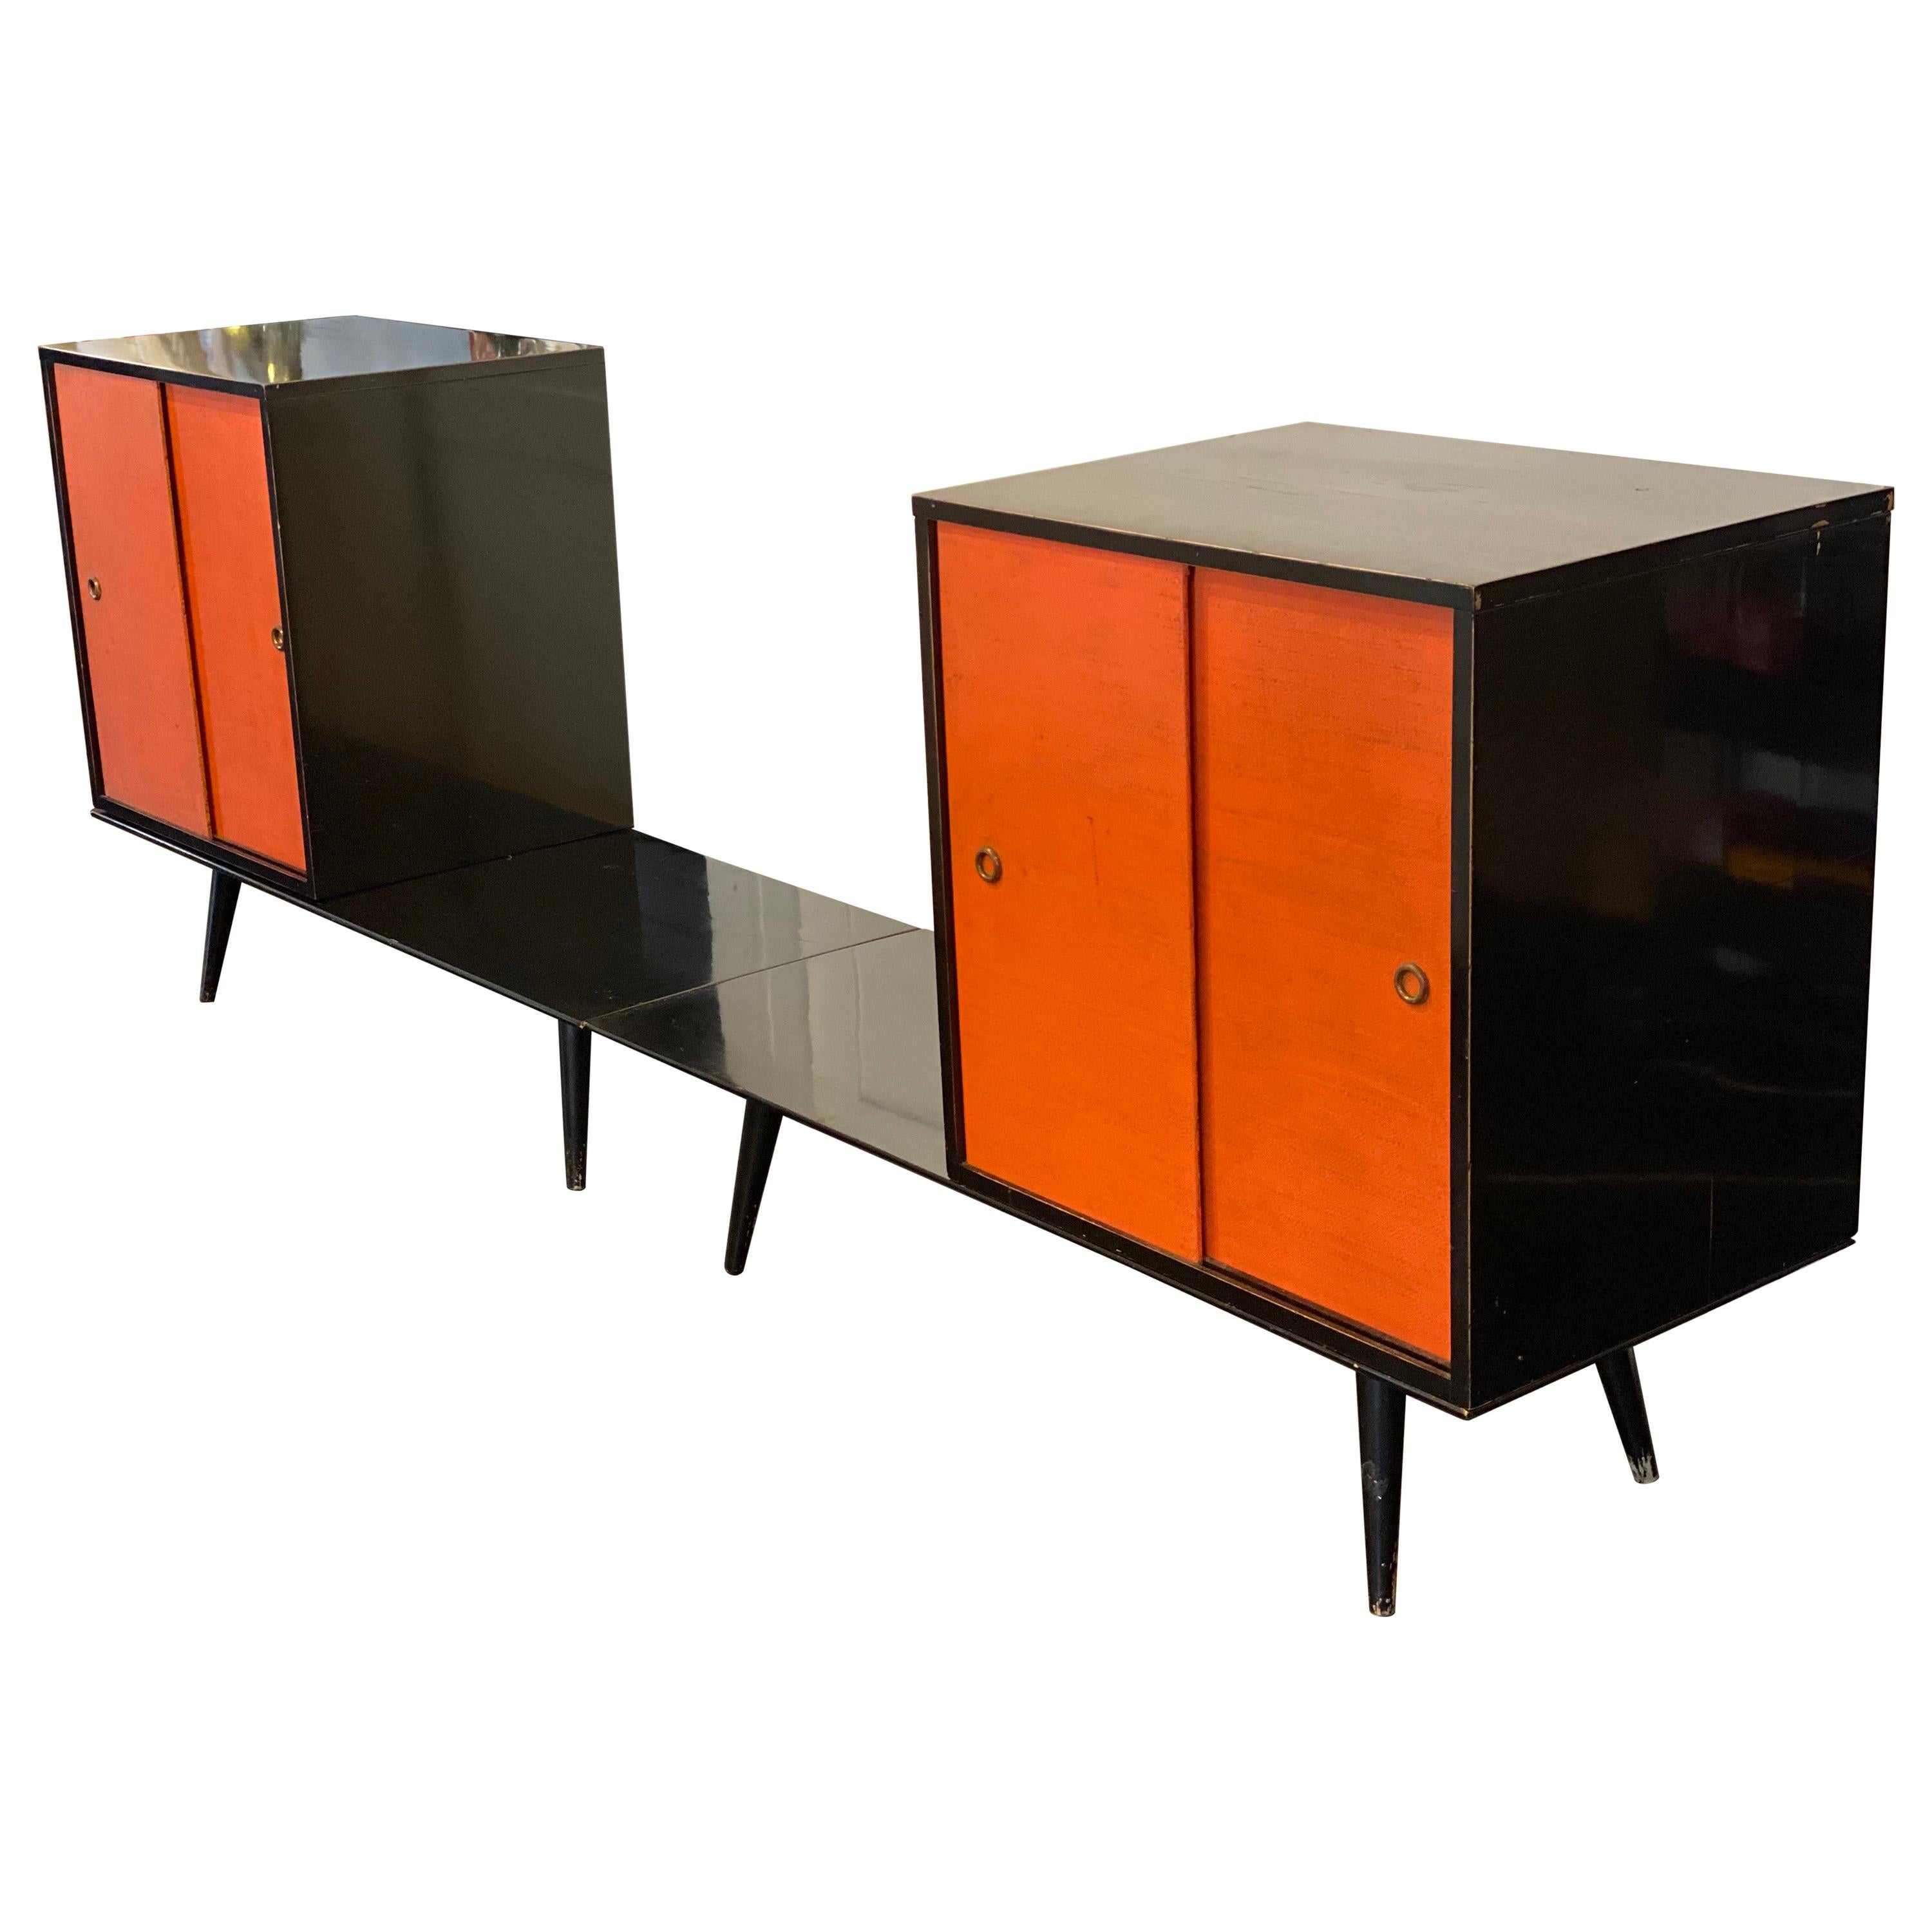 Midcentury Paul McCobb Planner Group Four Piece Cabinets with Benches, 1950s